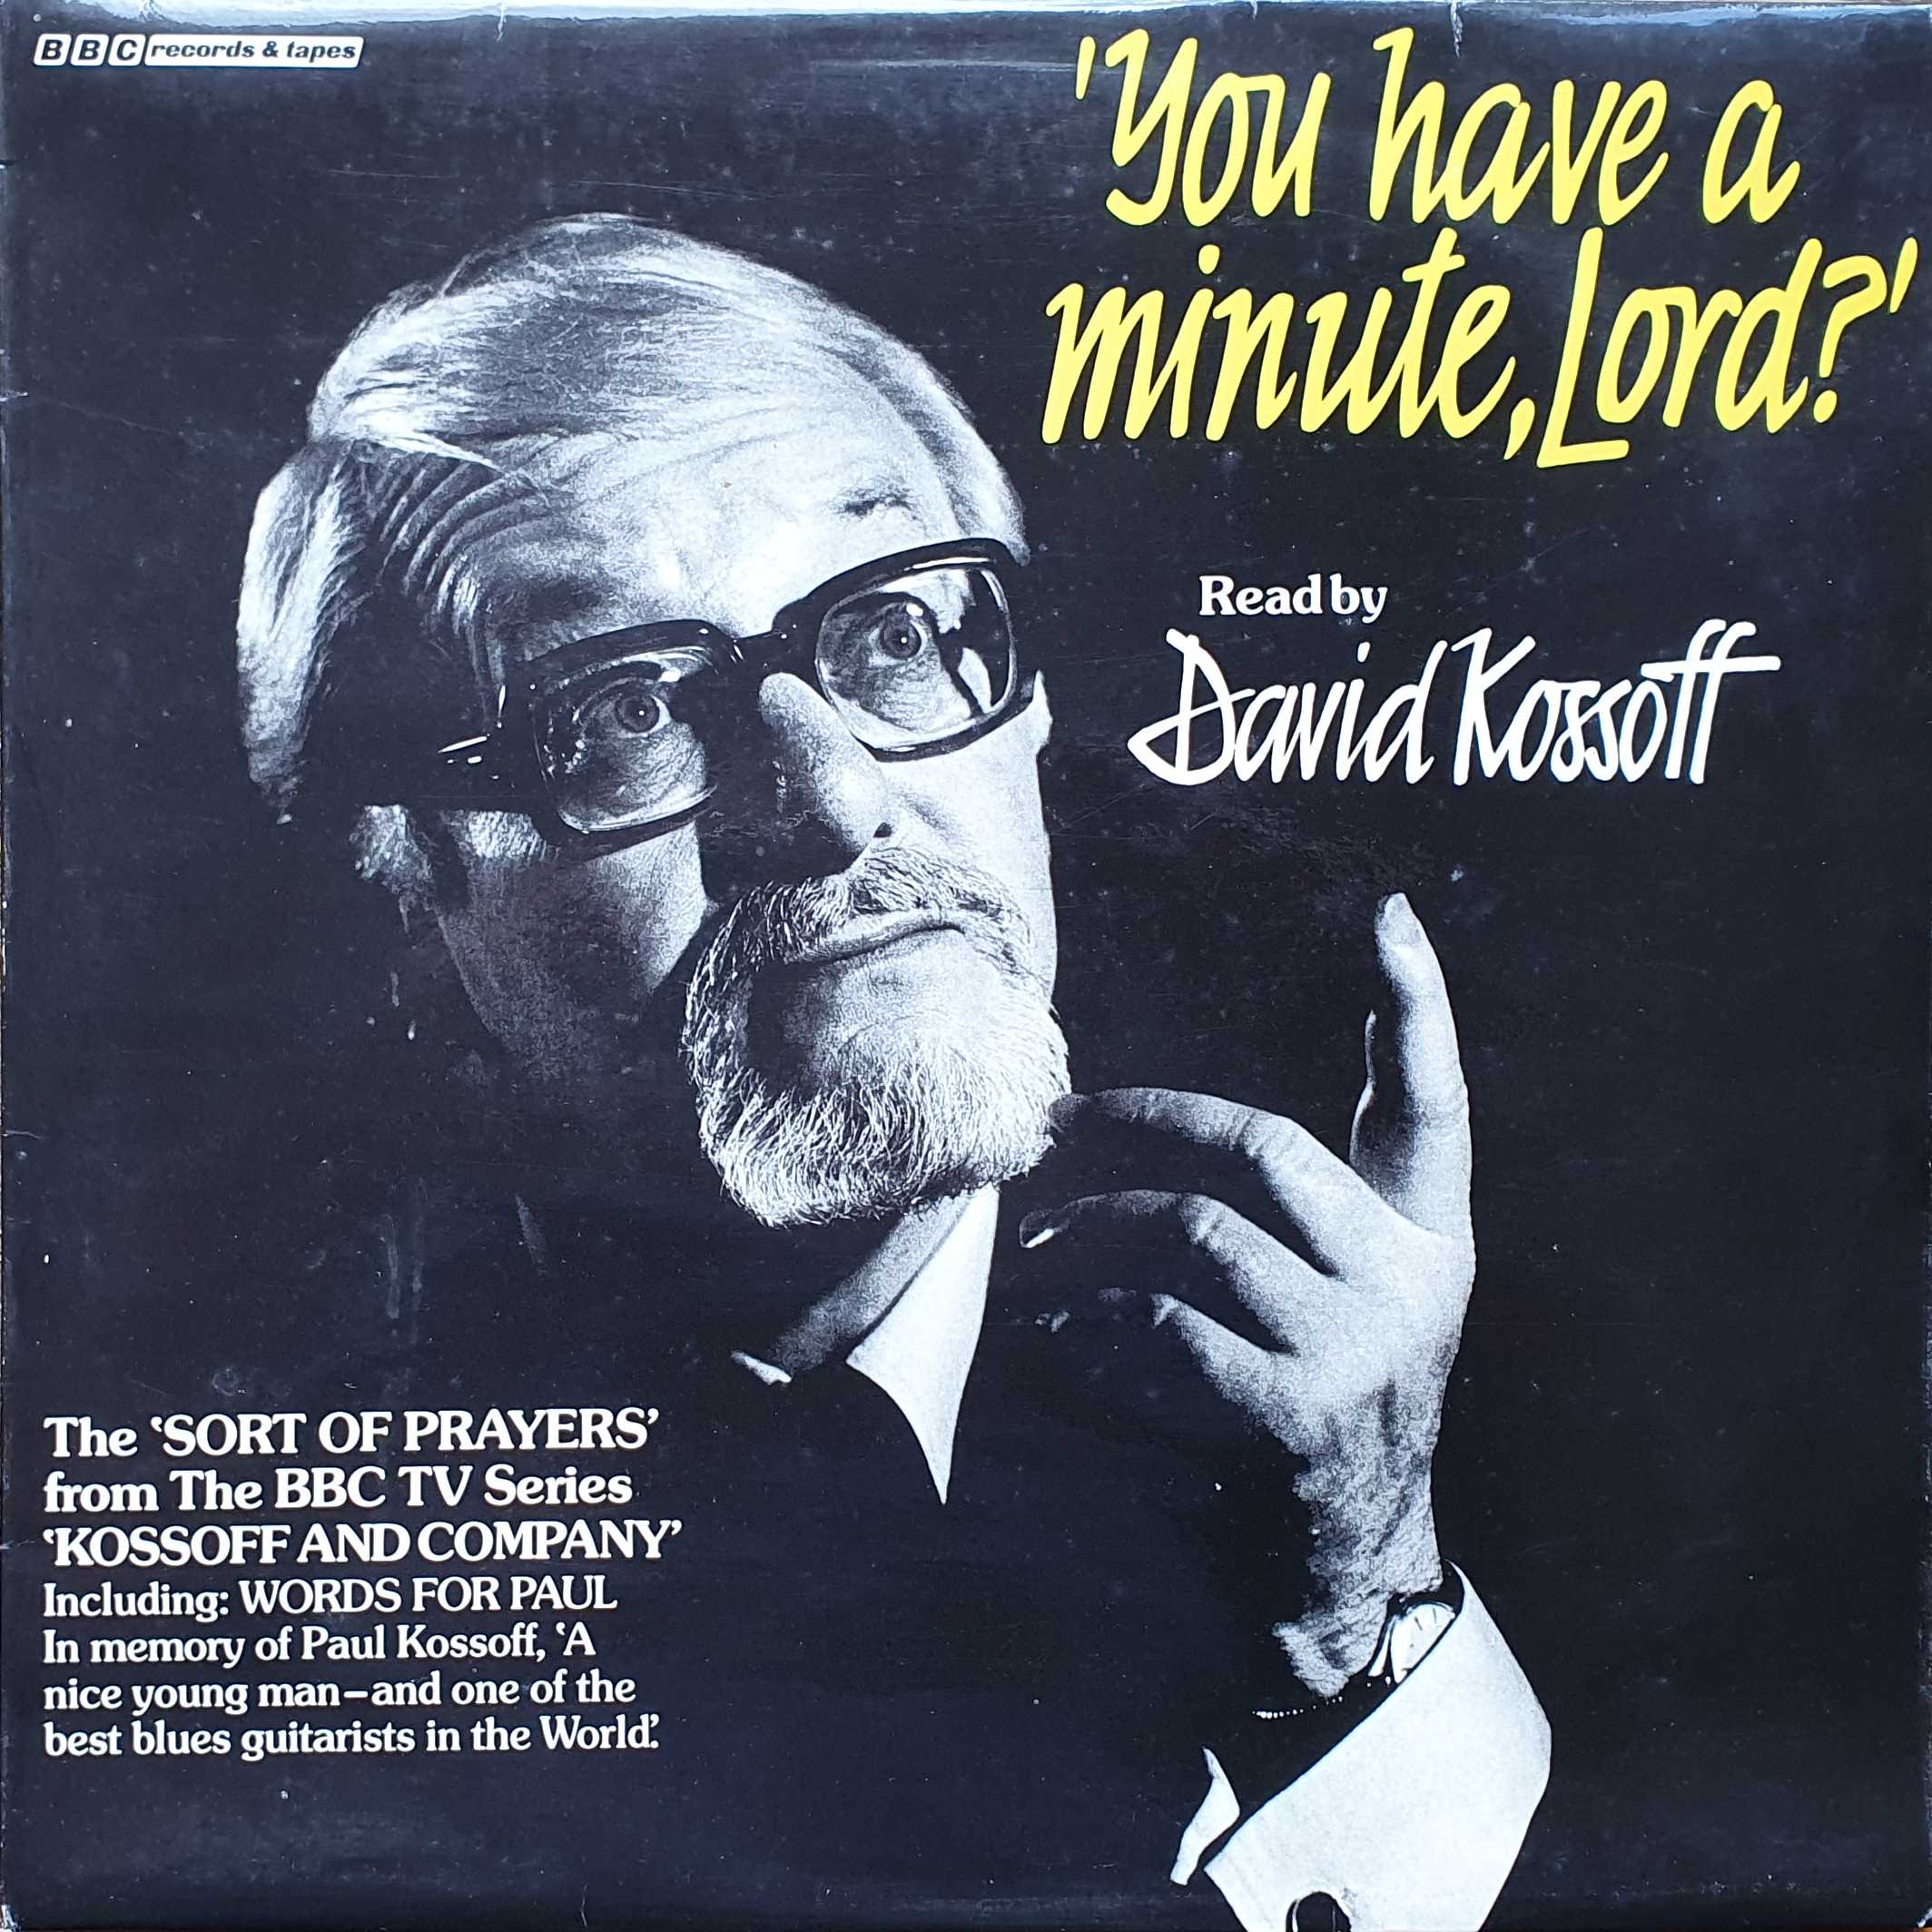 Picture of REC 312 You have a minute lord by artist David Kossoff from the BBC albums - Records and Tapes library